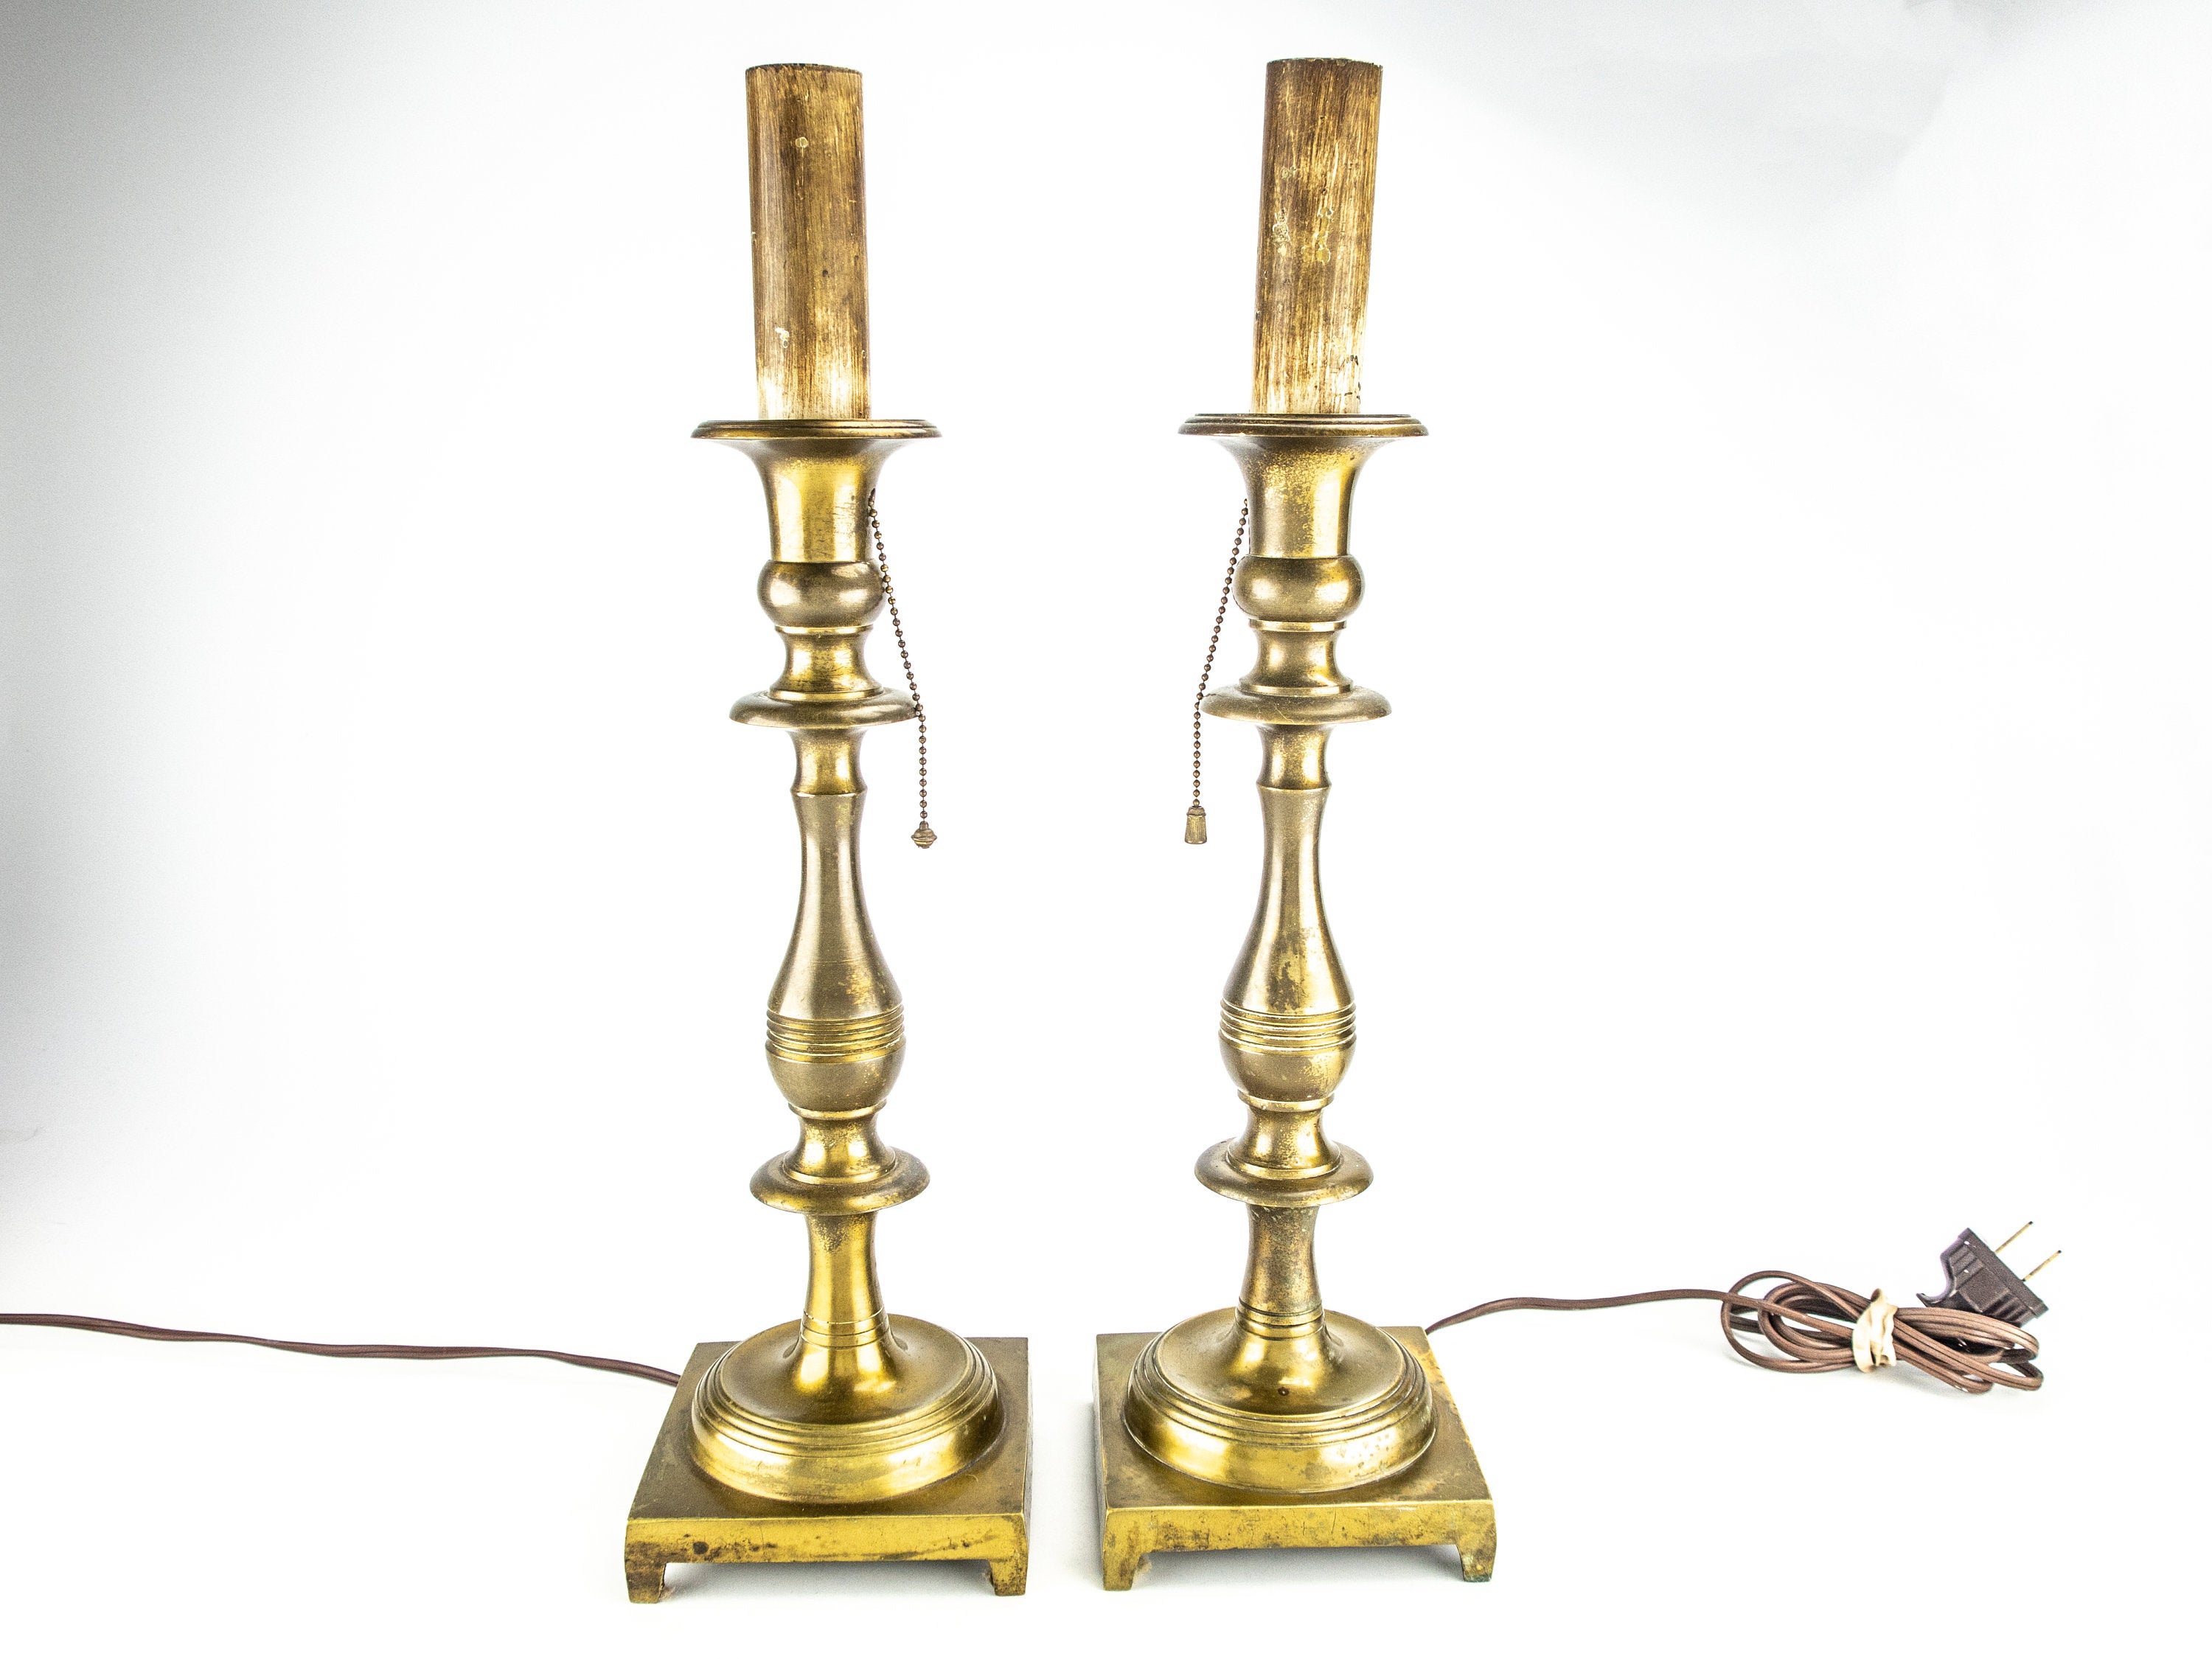 Antique Brass Altar Candle Holders Spring Loaded Church Candles